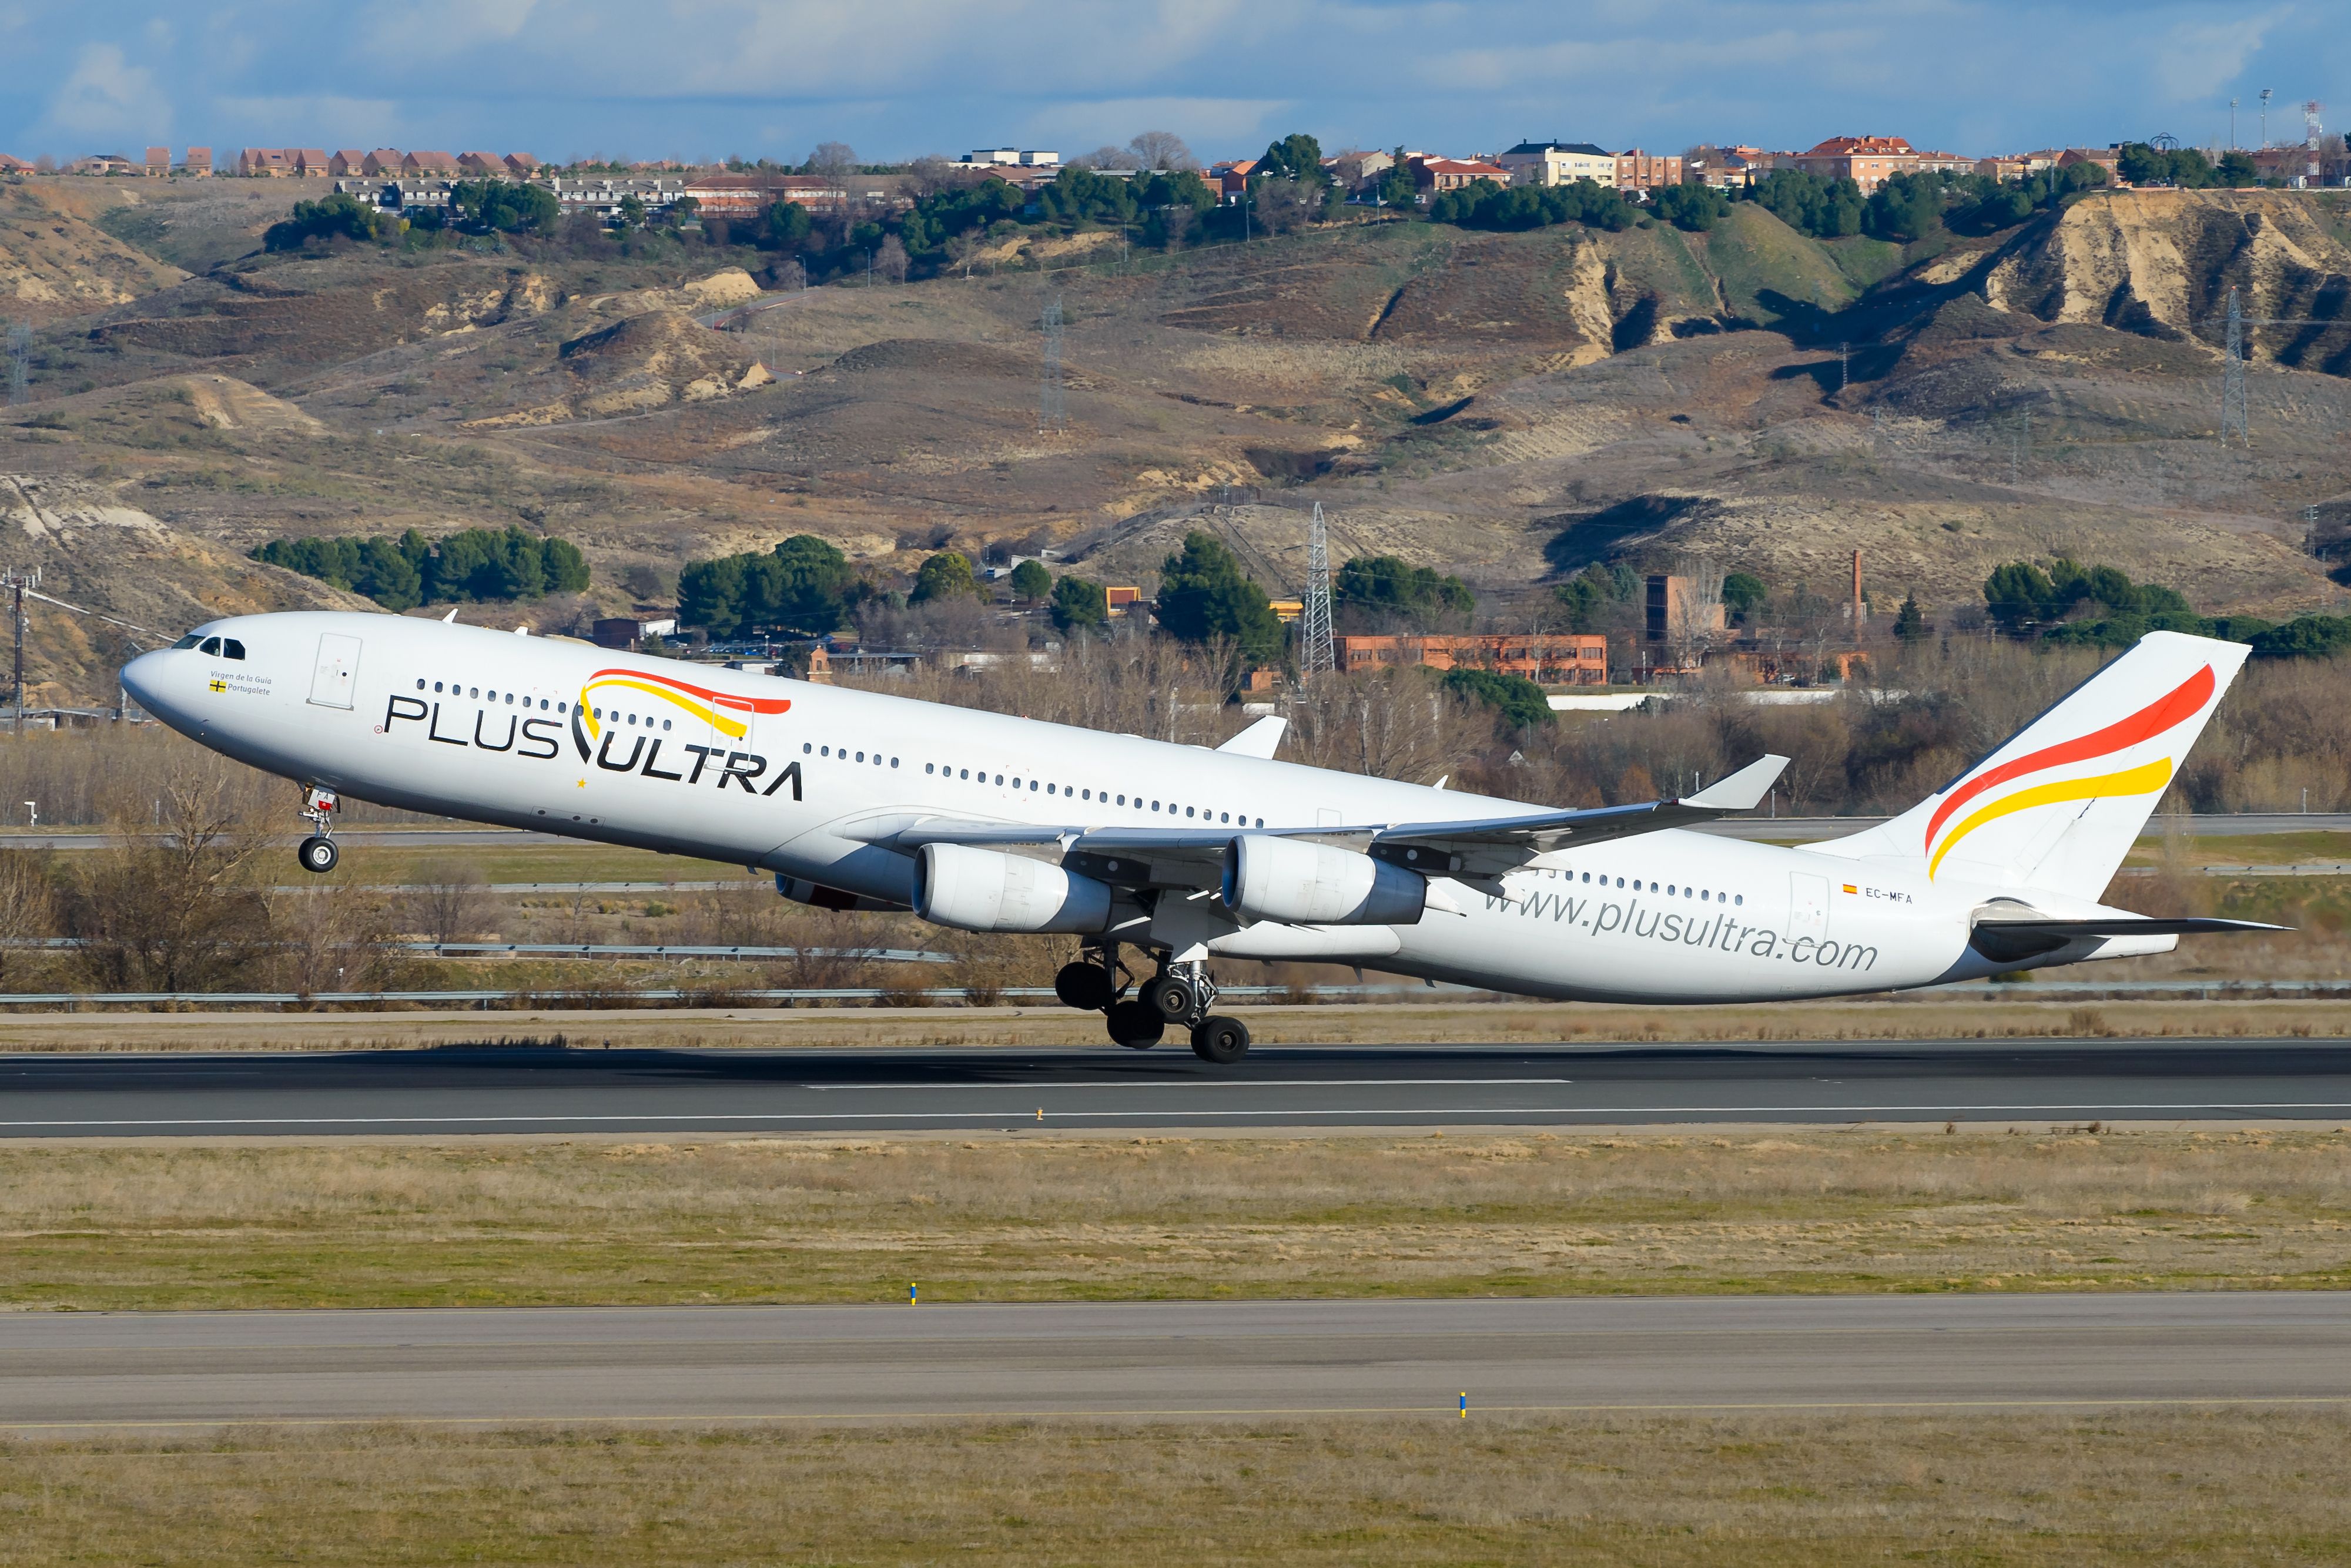 A Plus Ultra Airbus A340-300 departing 